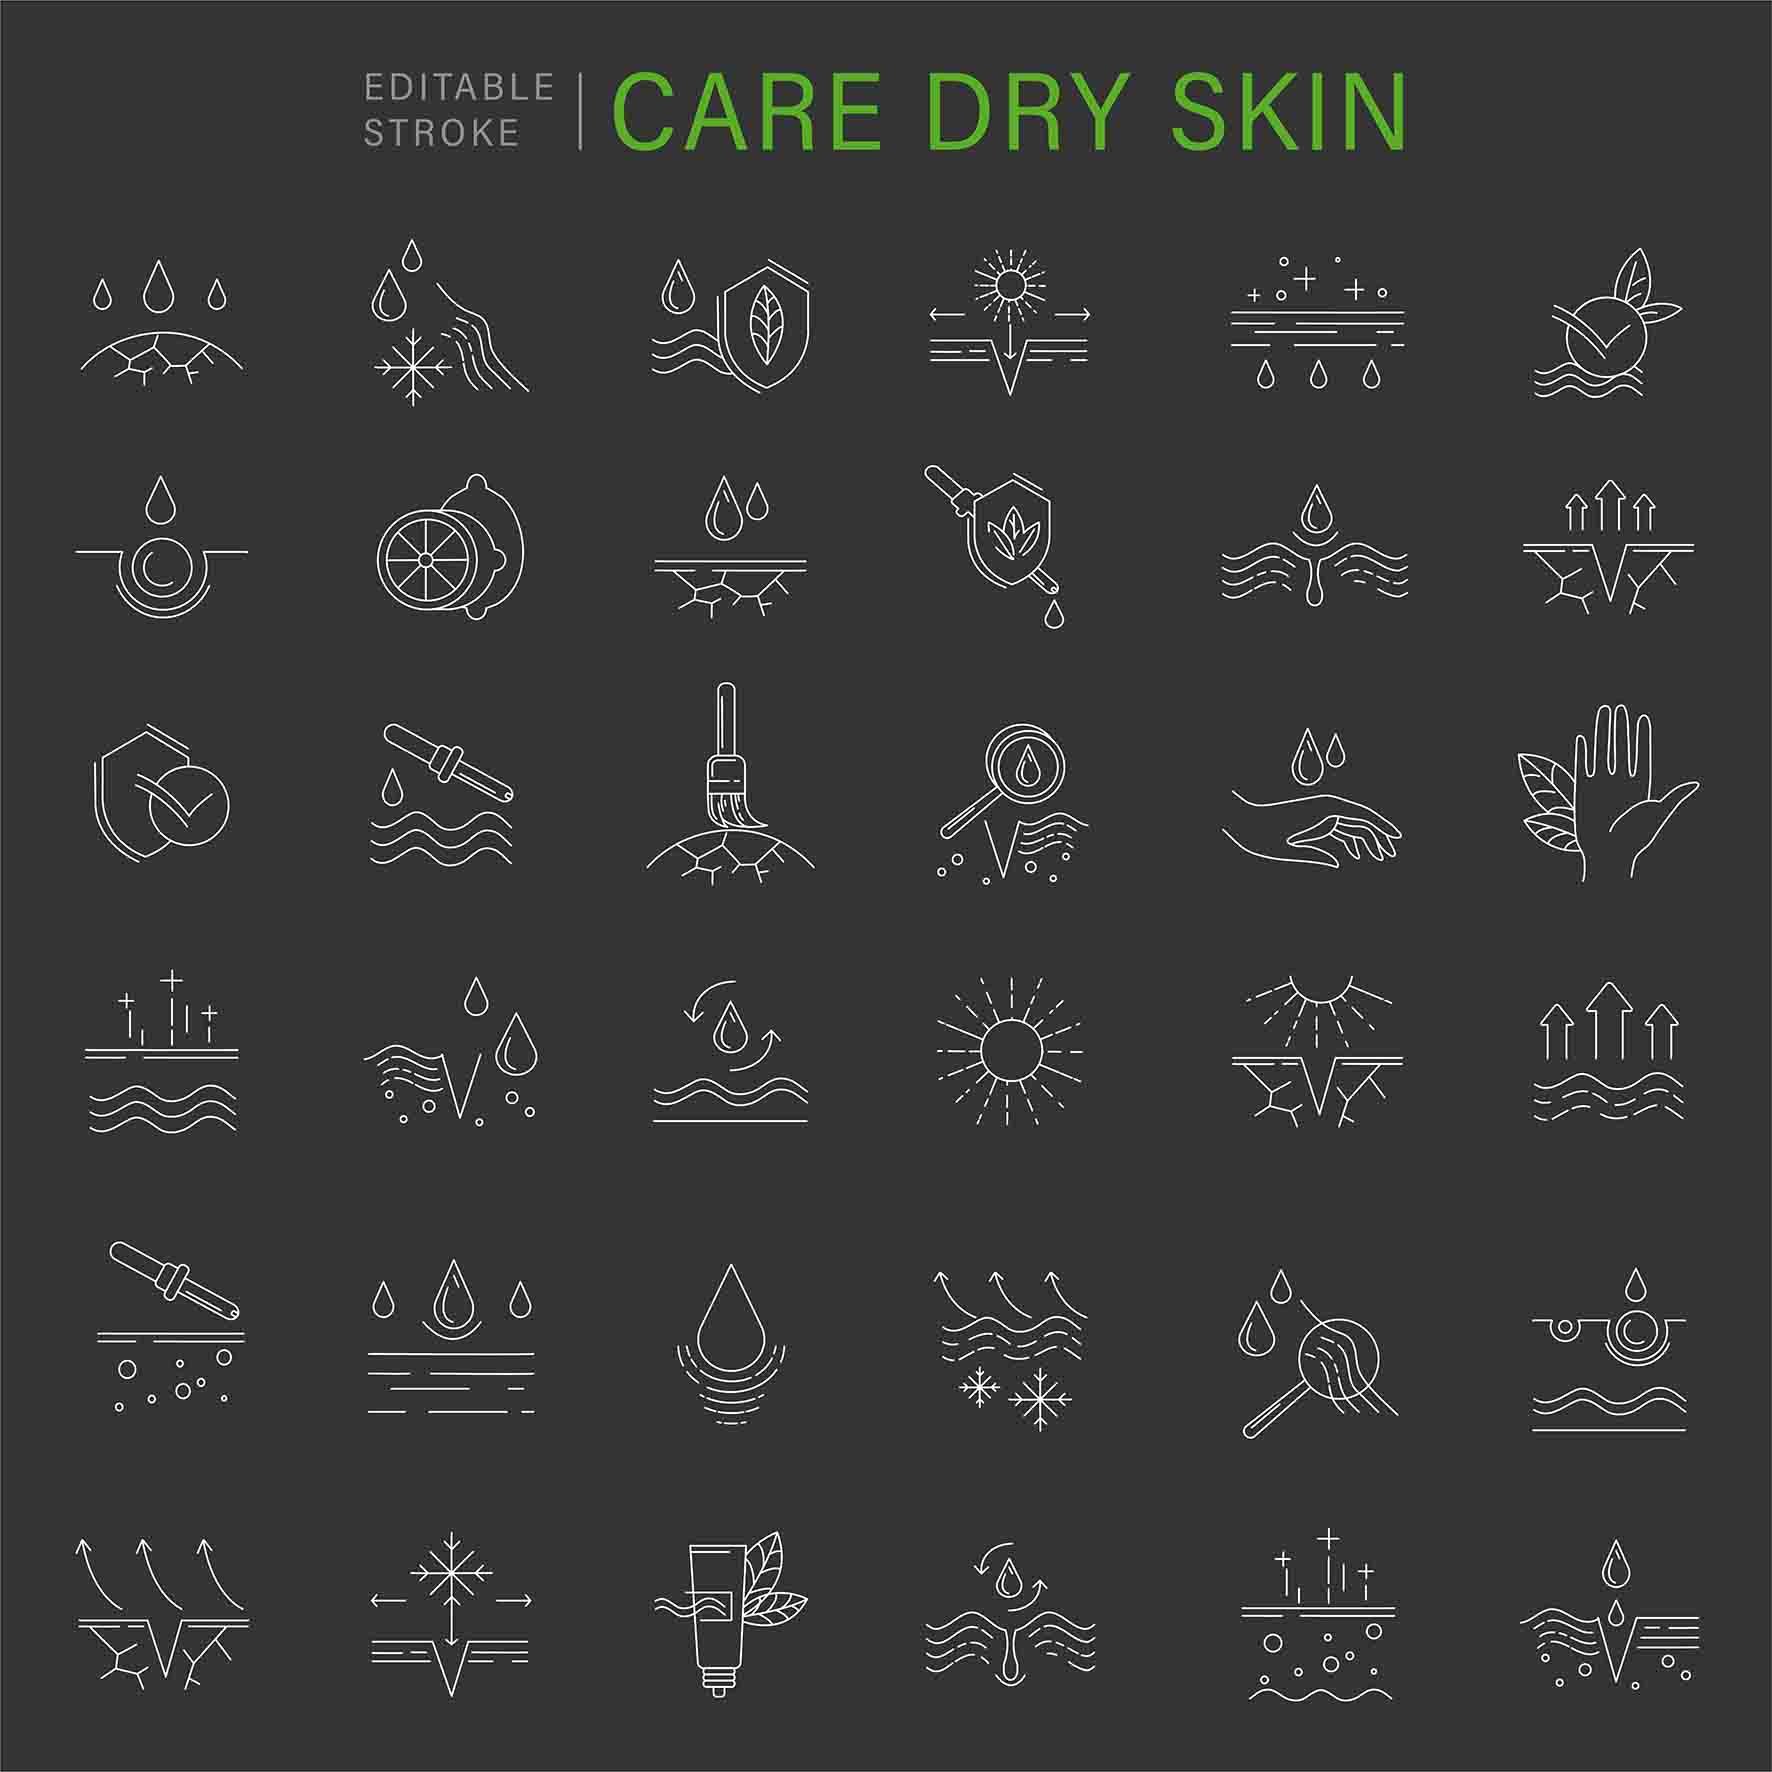 care dry skin icons t 03 573